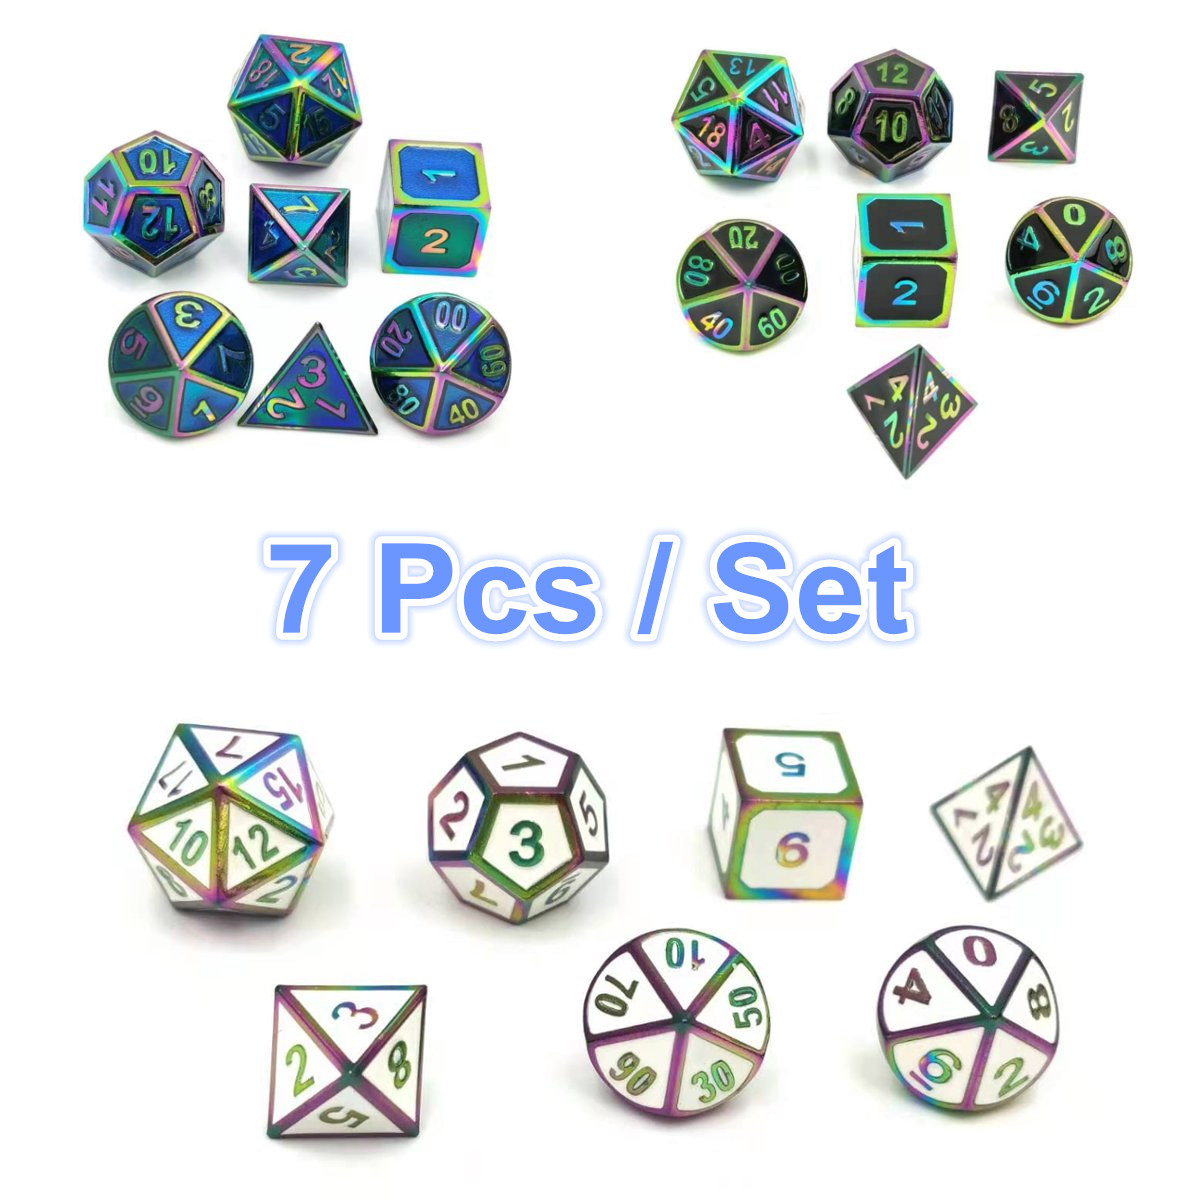 7-Pcs-Alloy-Polyhedral-Dices-Set-Role-Playing-Game-Accessory-For-Dungeons-Dragons-1618804-1